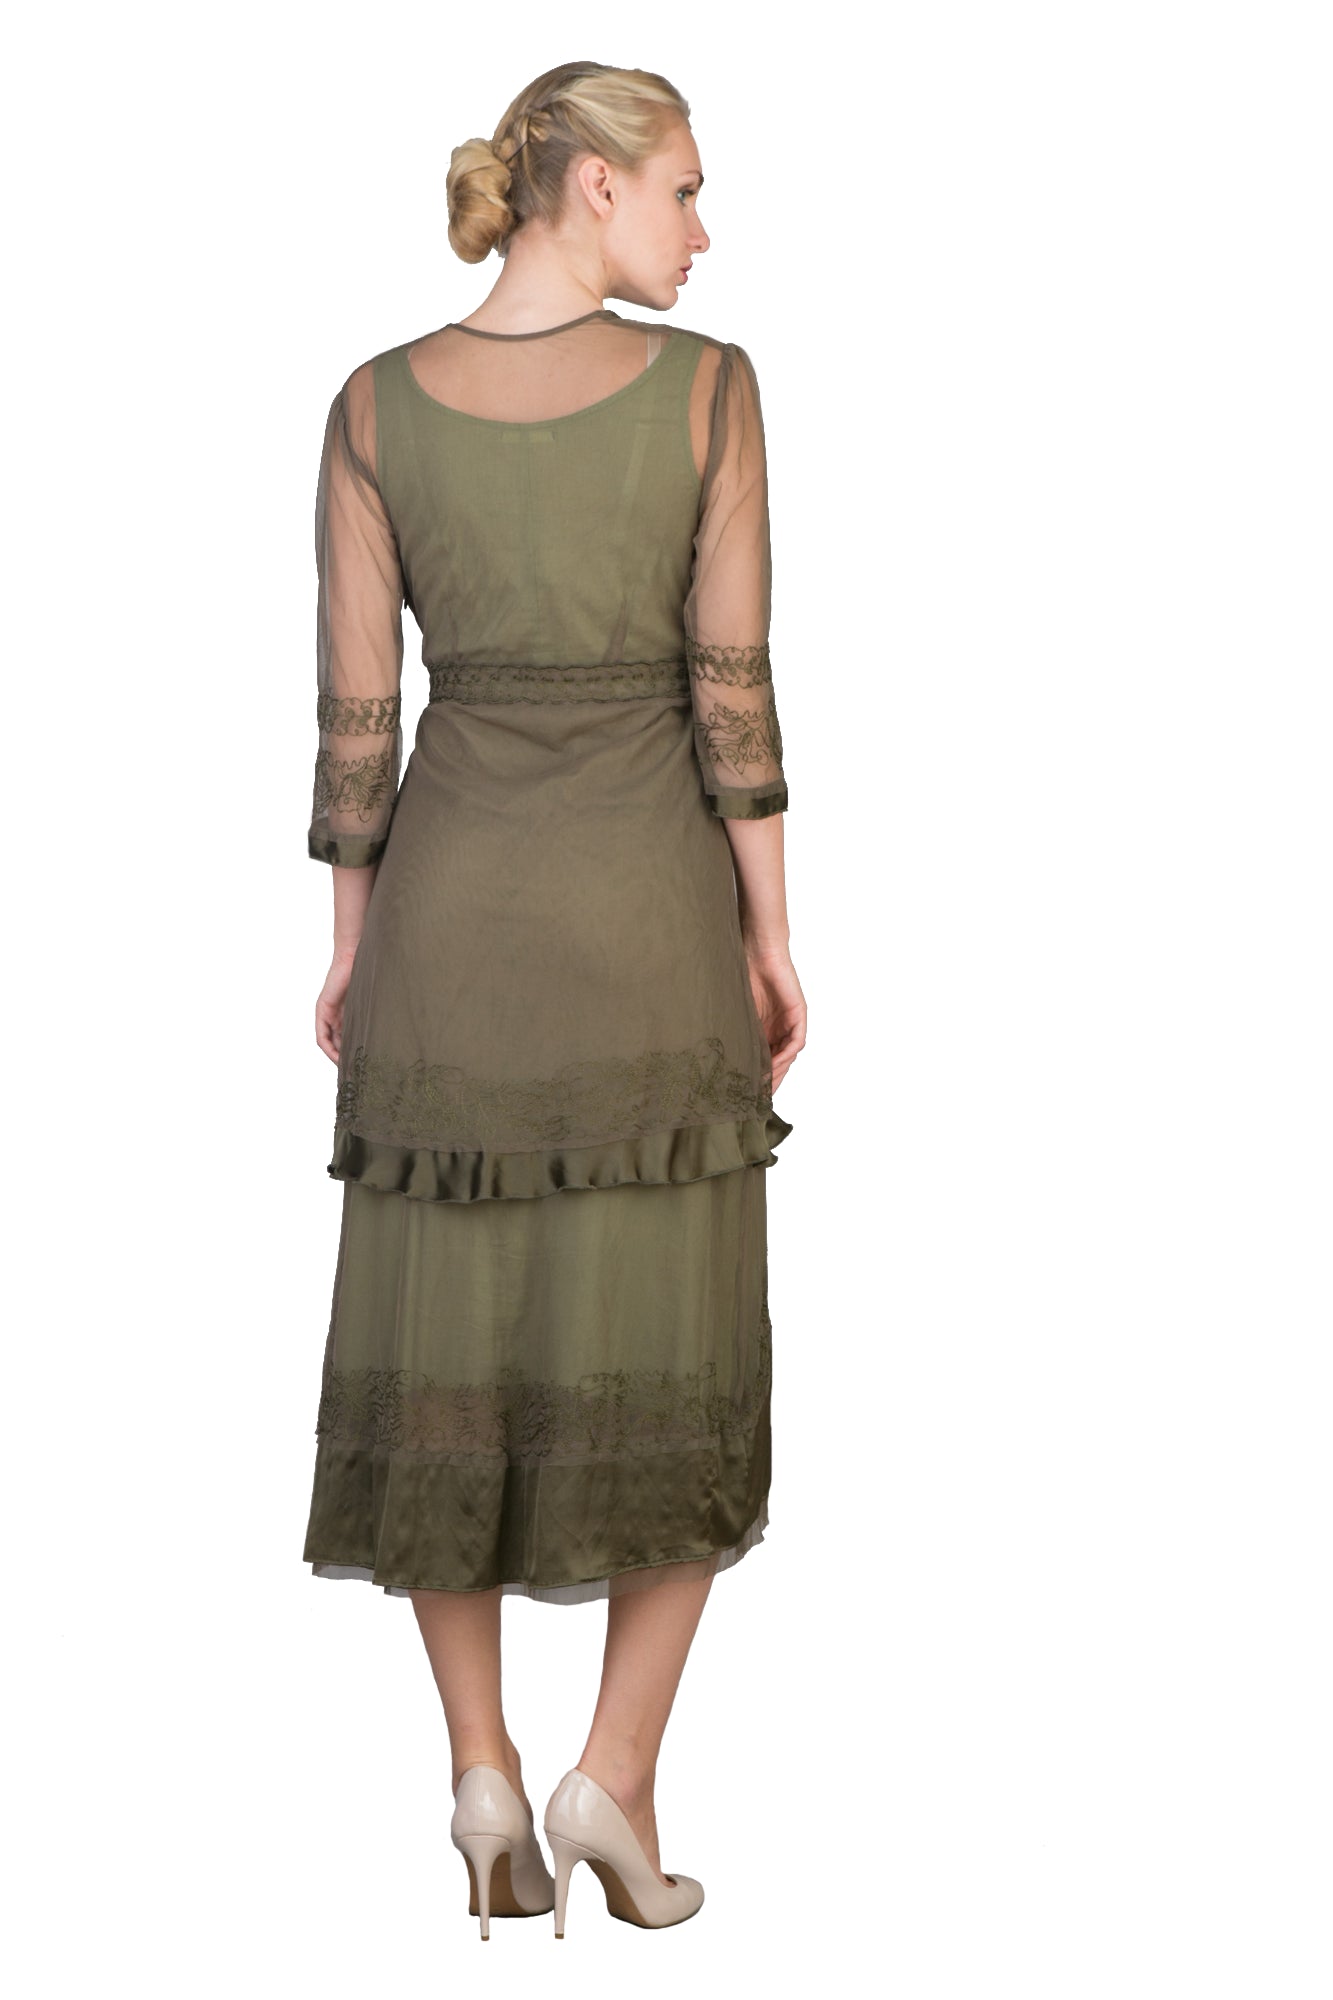 Embroidered Empire Waist Vintage Party Dress in Aloe by Nataya - SALE